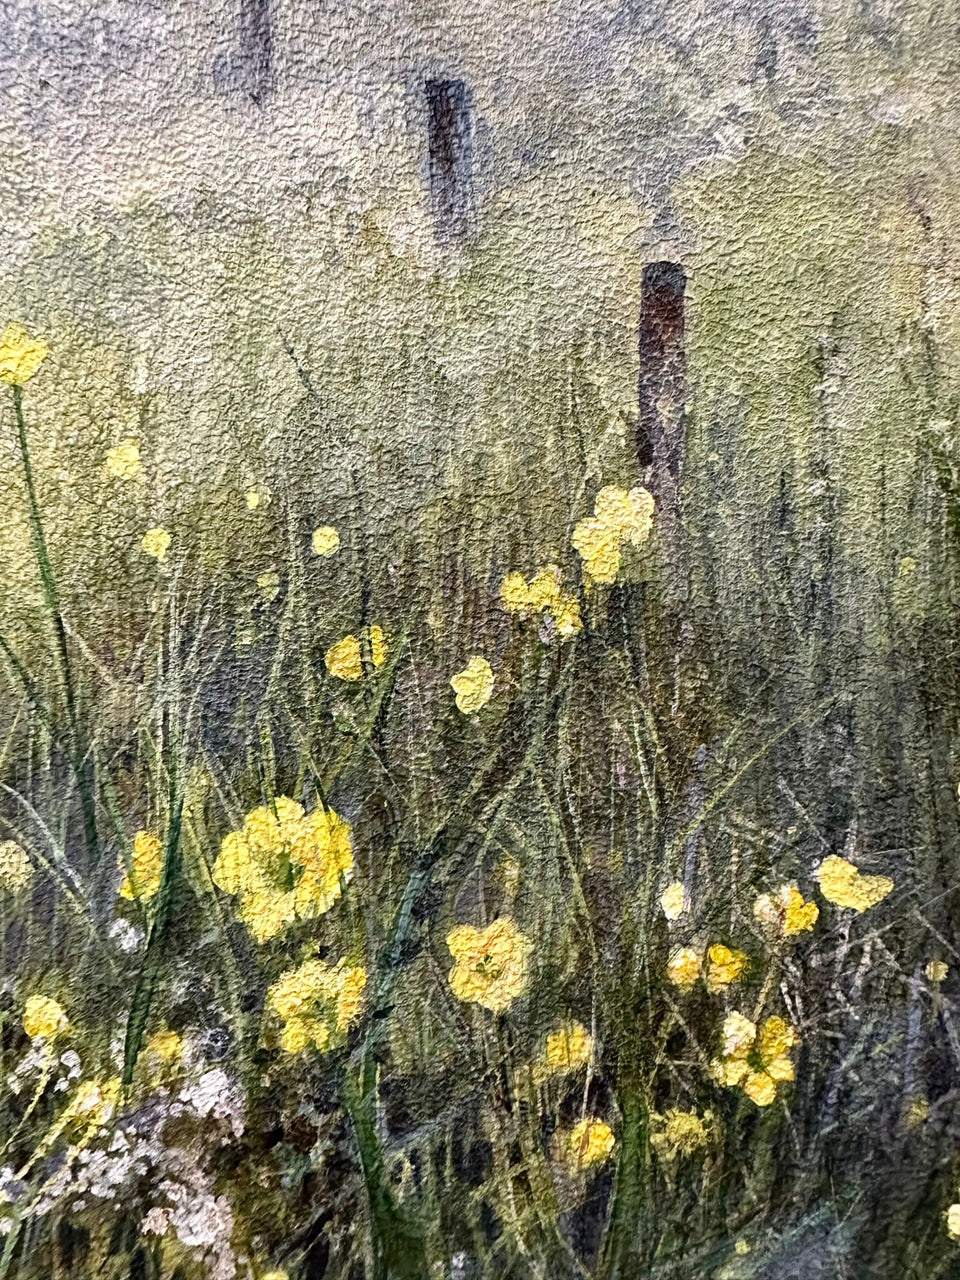 Buttercup Meadow on a wooden panel - Original by Sarah Stoker